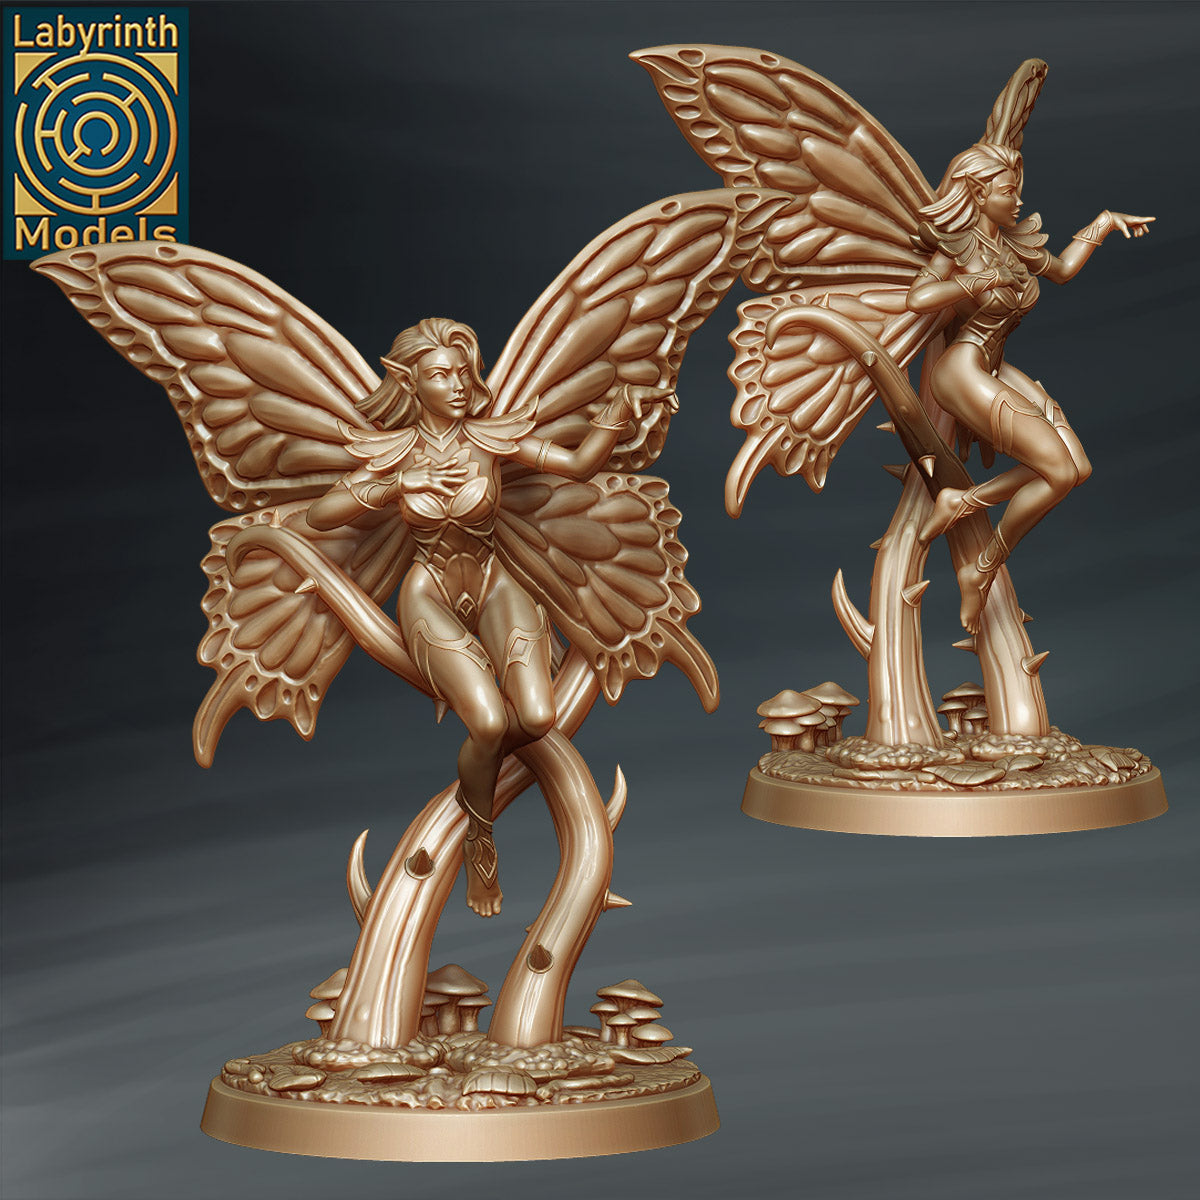 Faeries by Labyrinth Models